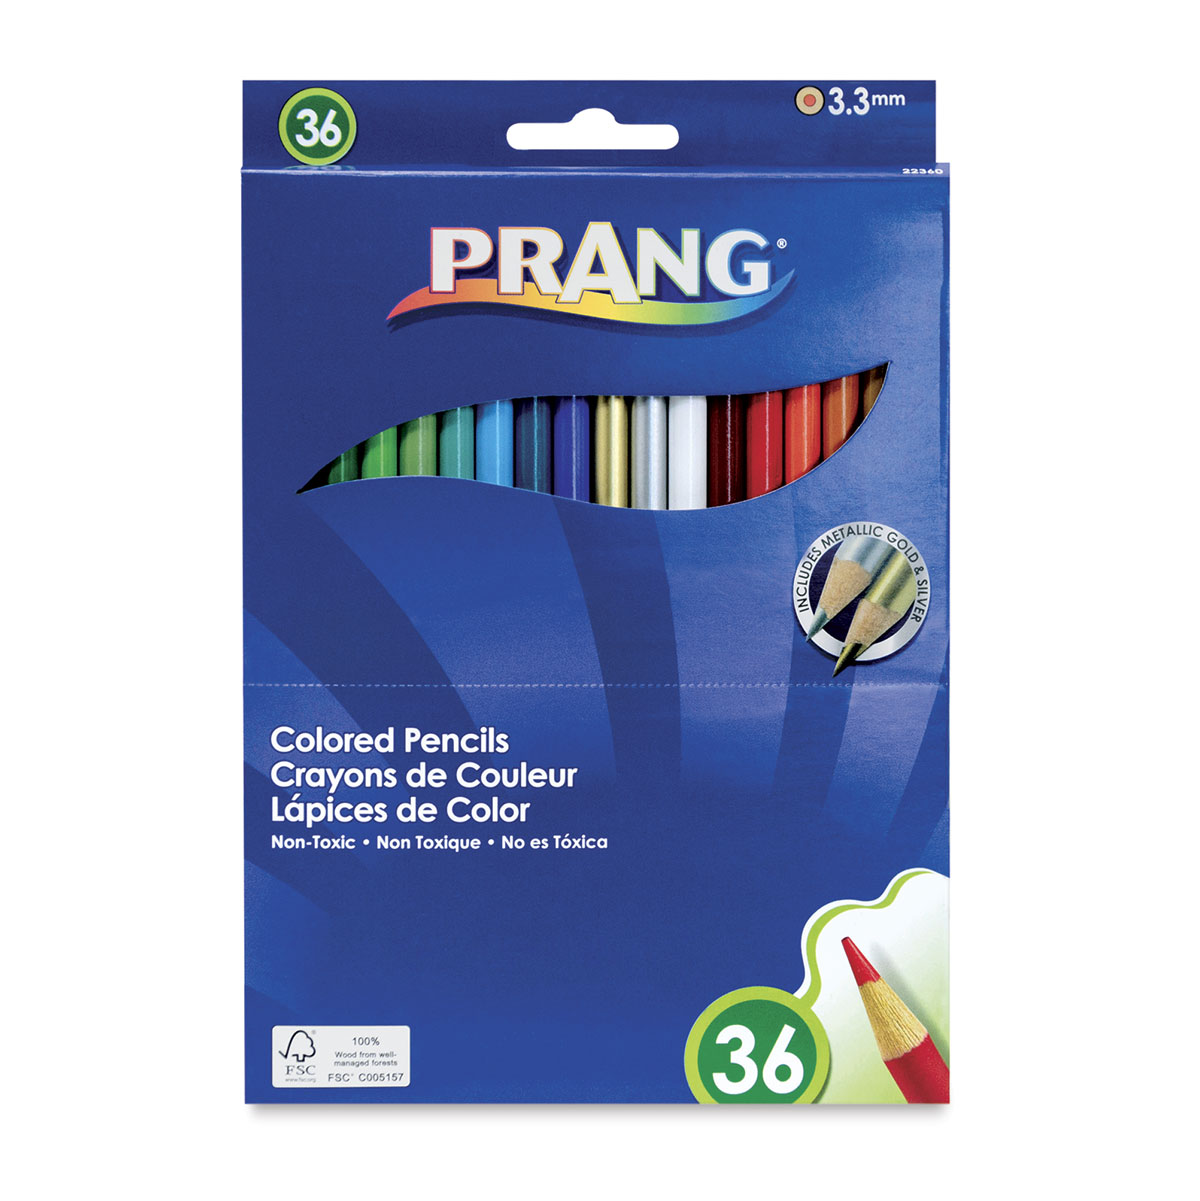 Polymer Spartex Colour Pencil-Small, For Coloring, Packaging Size: 10pcs  Boxx